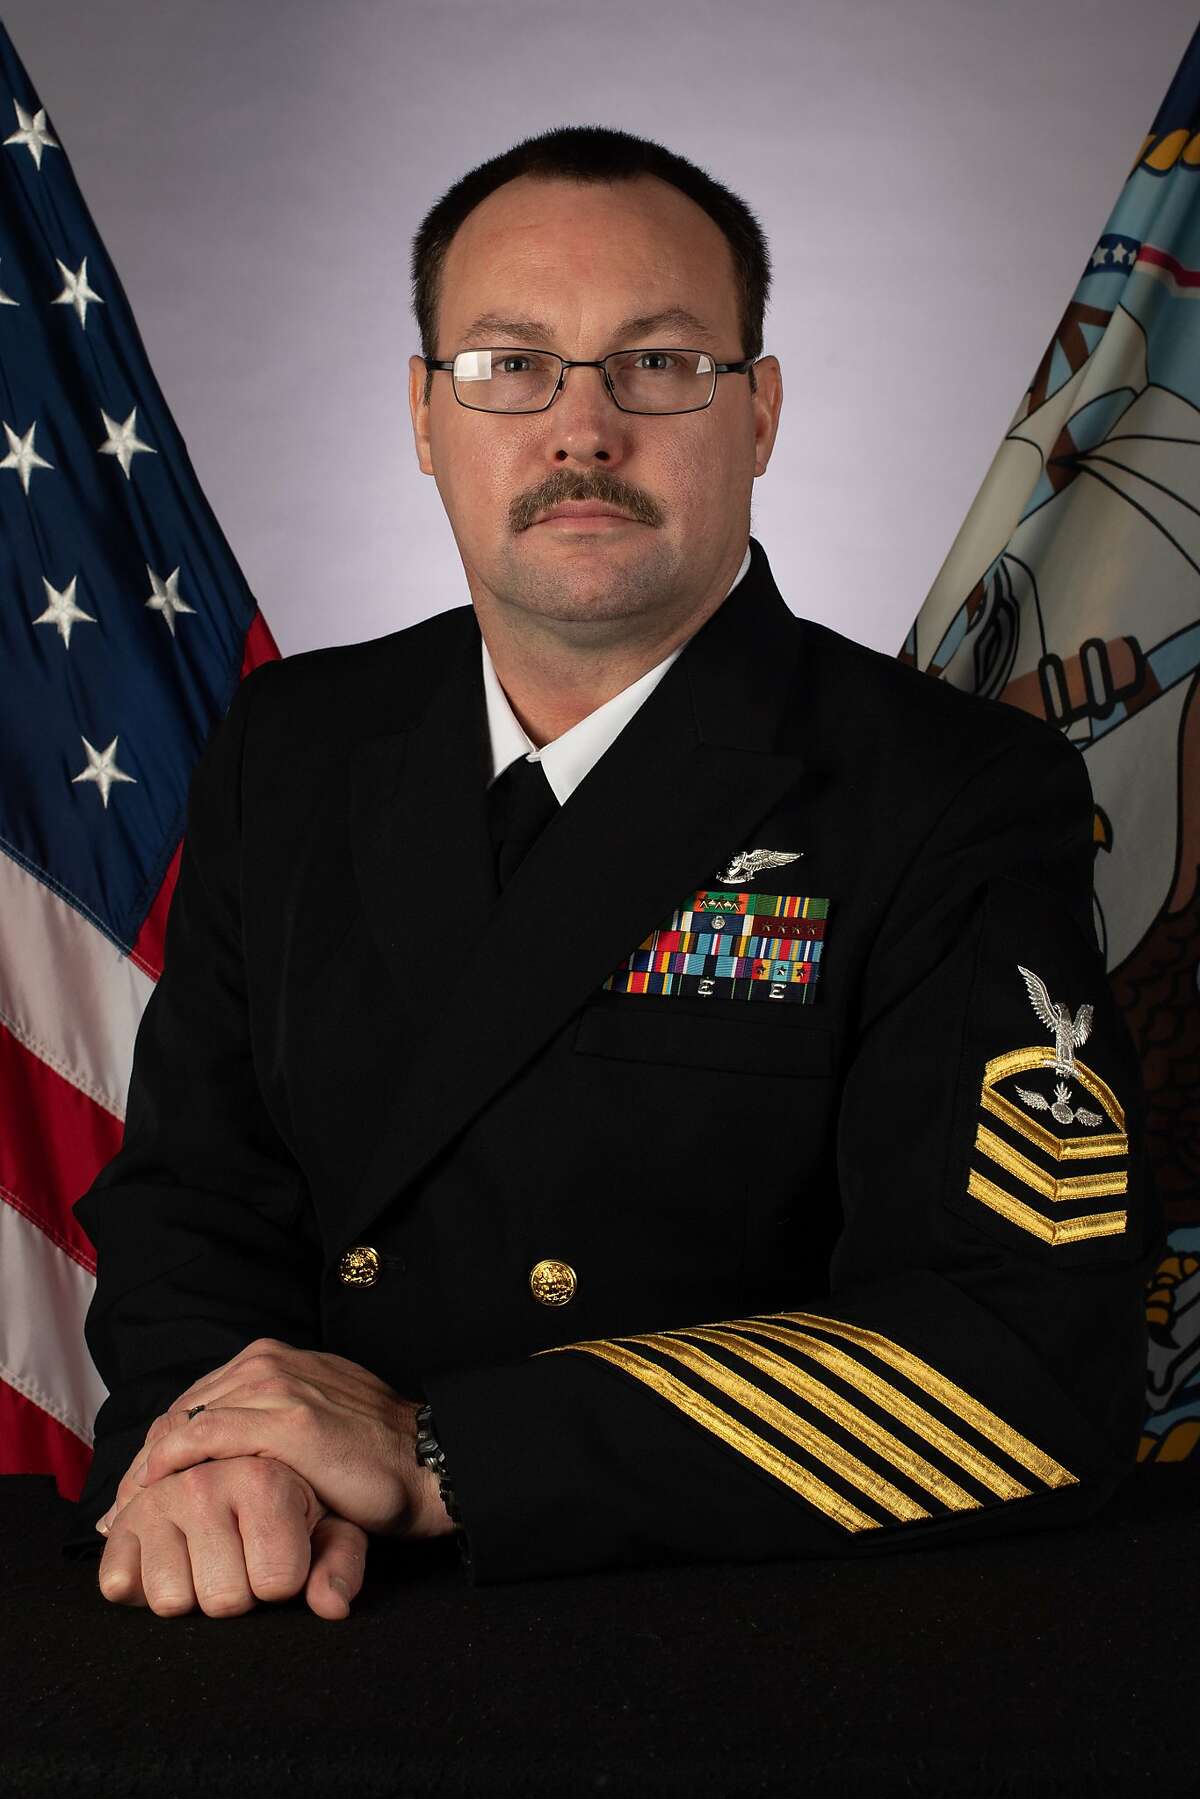 Aviation Ordnanceman Chief Petty Officer Charles Robert Thacker Jr., 41, originally of Fort Smith, Ark., died April 13 from COVID-19 complications in Guam after contracting the illness aboard the Theodore Roosevelt.